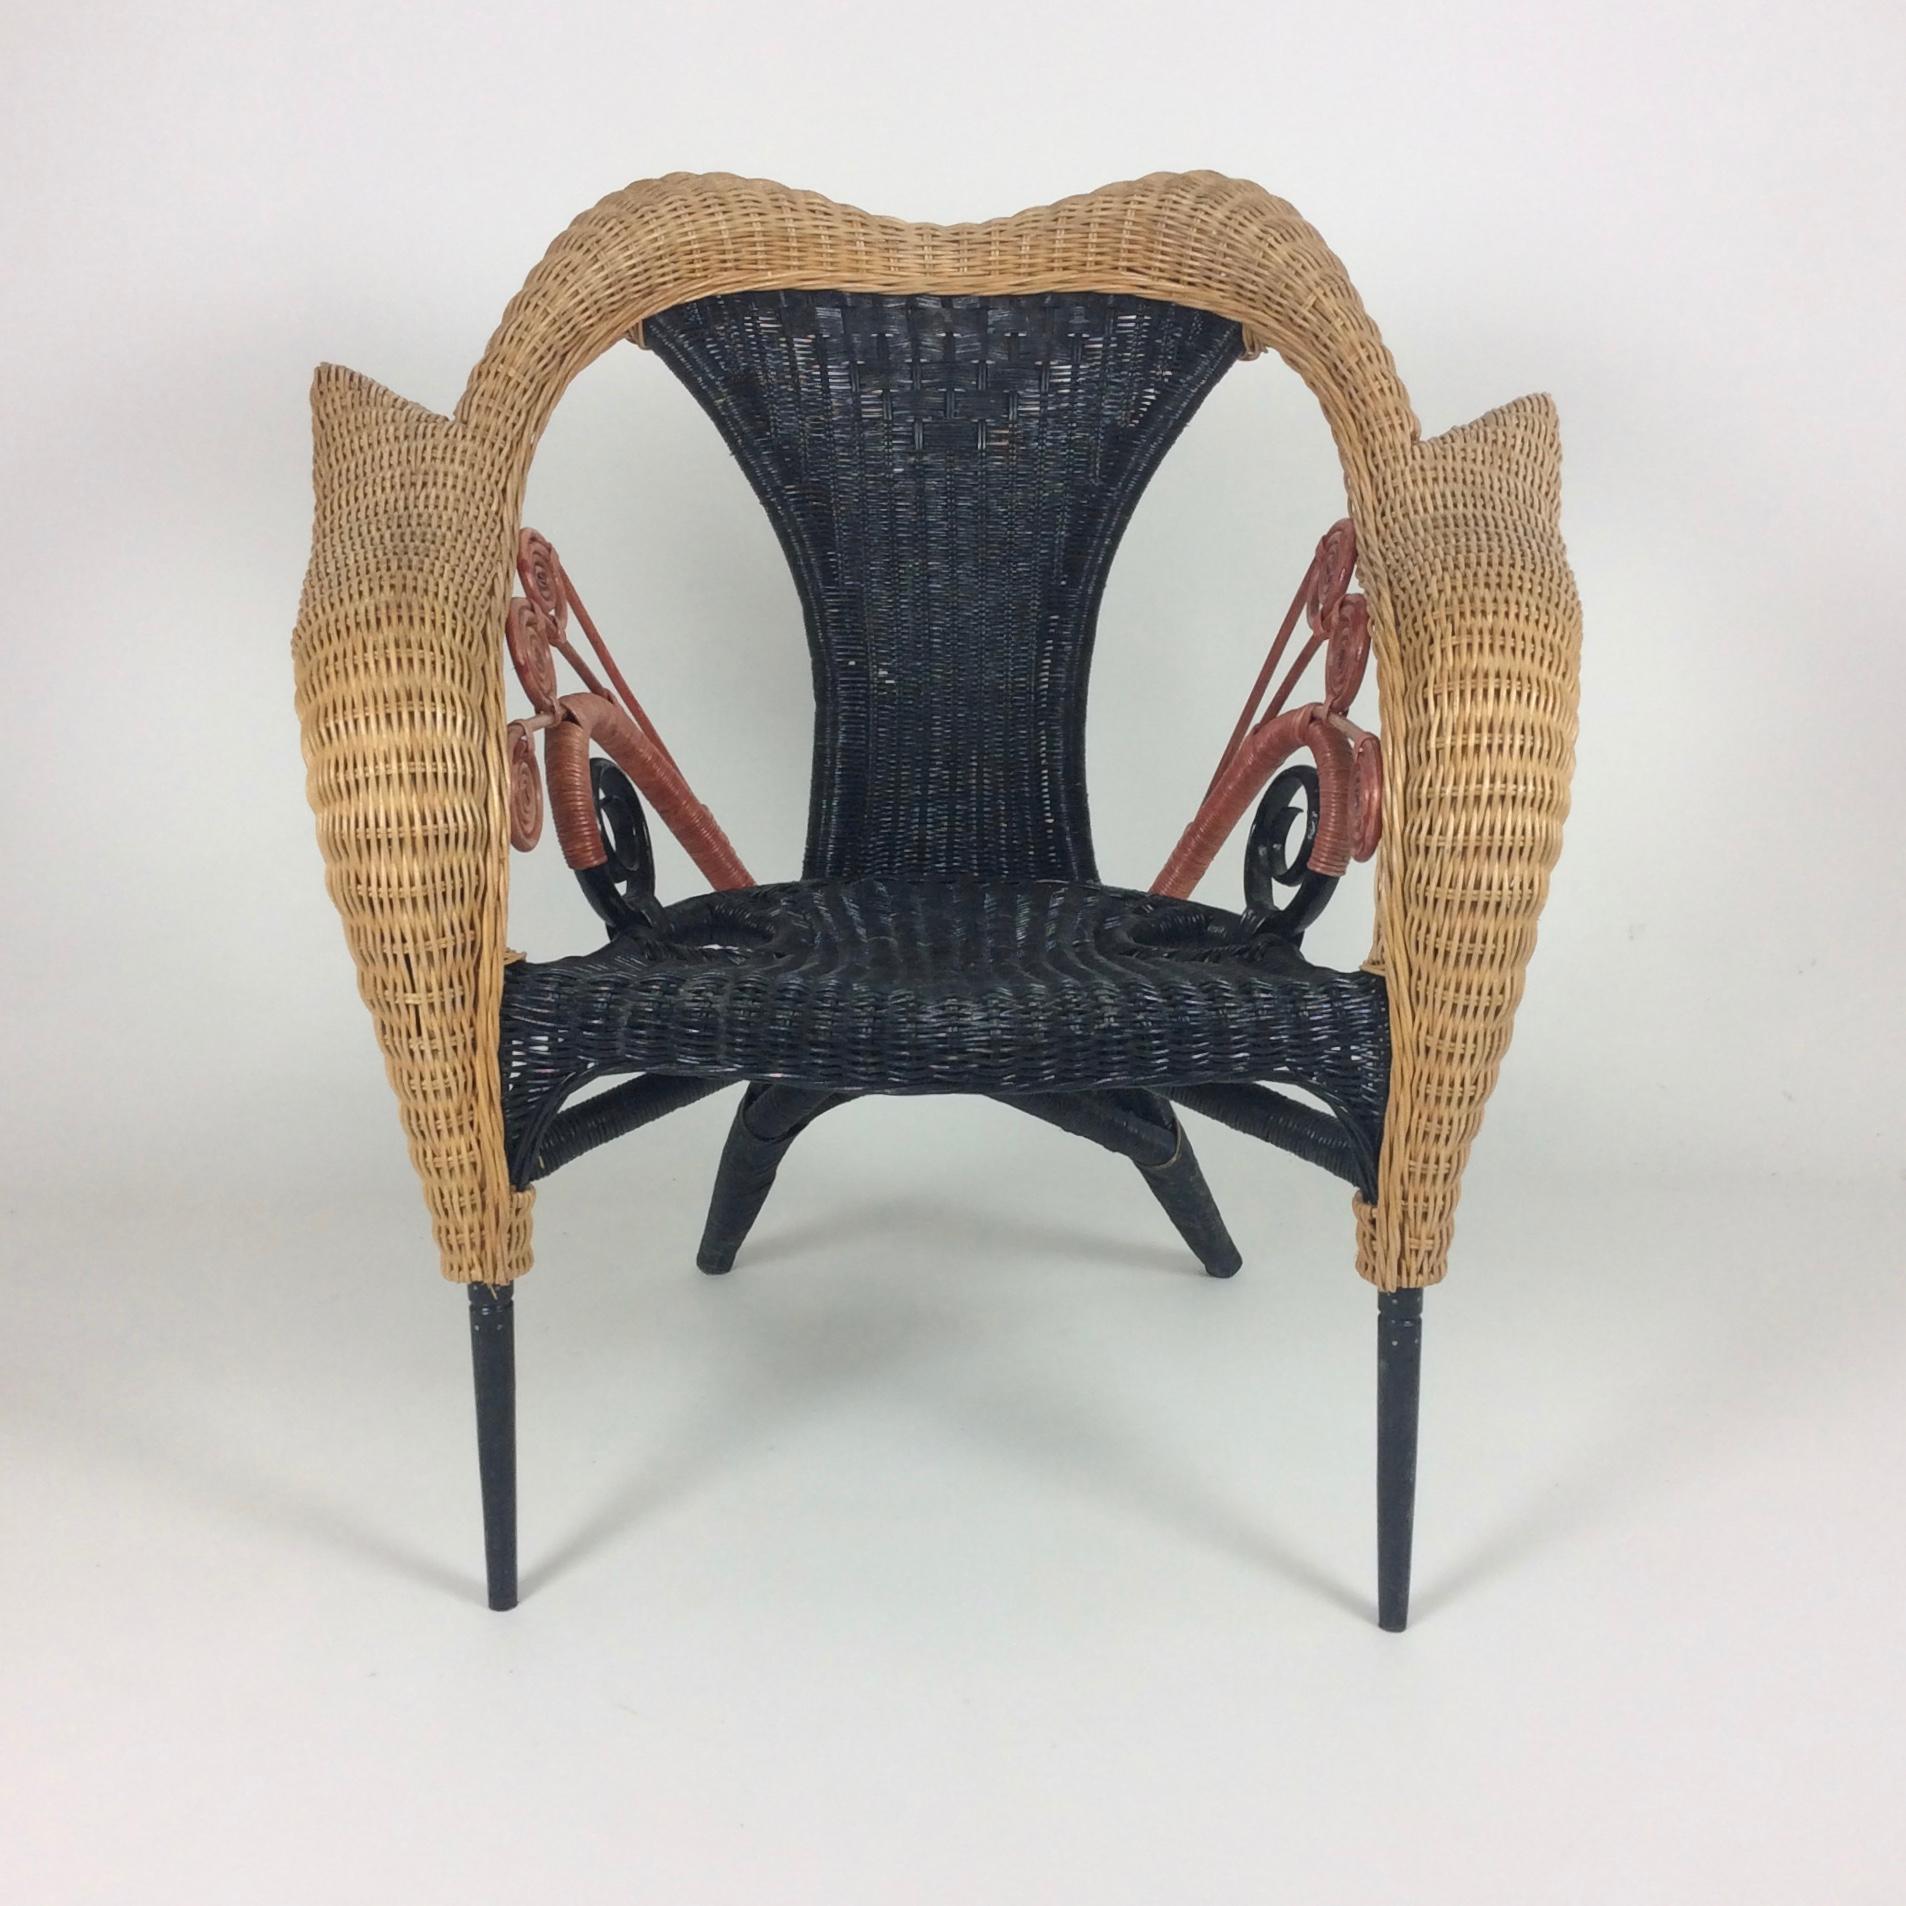 Borek Sipek armchair, Prorok model for Driade, 1988, Italy.
Natural, black and rose-red cane, solid blackened wood.
Dimensions: 90 cm W, 91 cm H, 62 cm D, seat height 45 cm.
Original condition.
All purchases are covered by our Buyer Protection